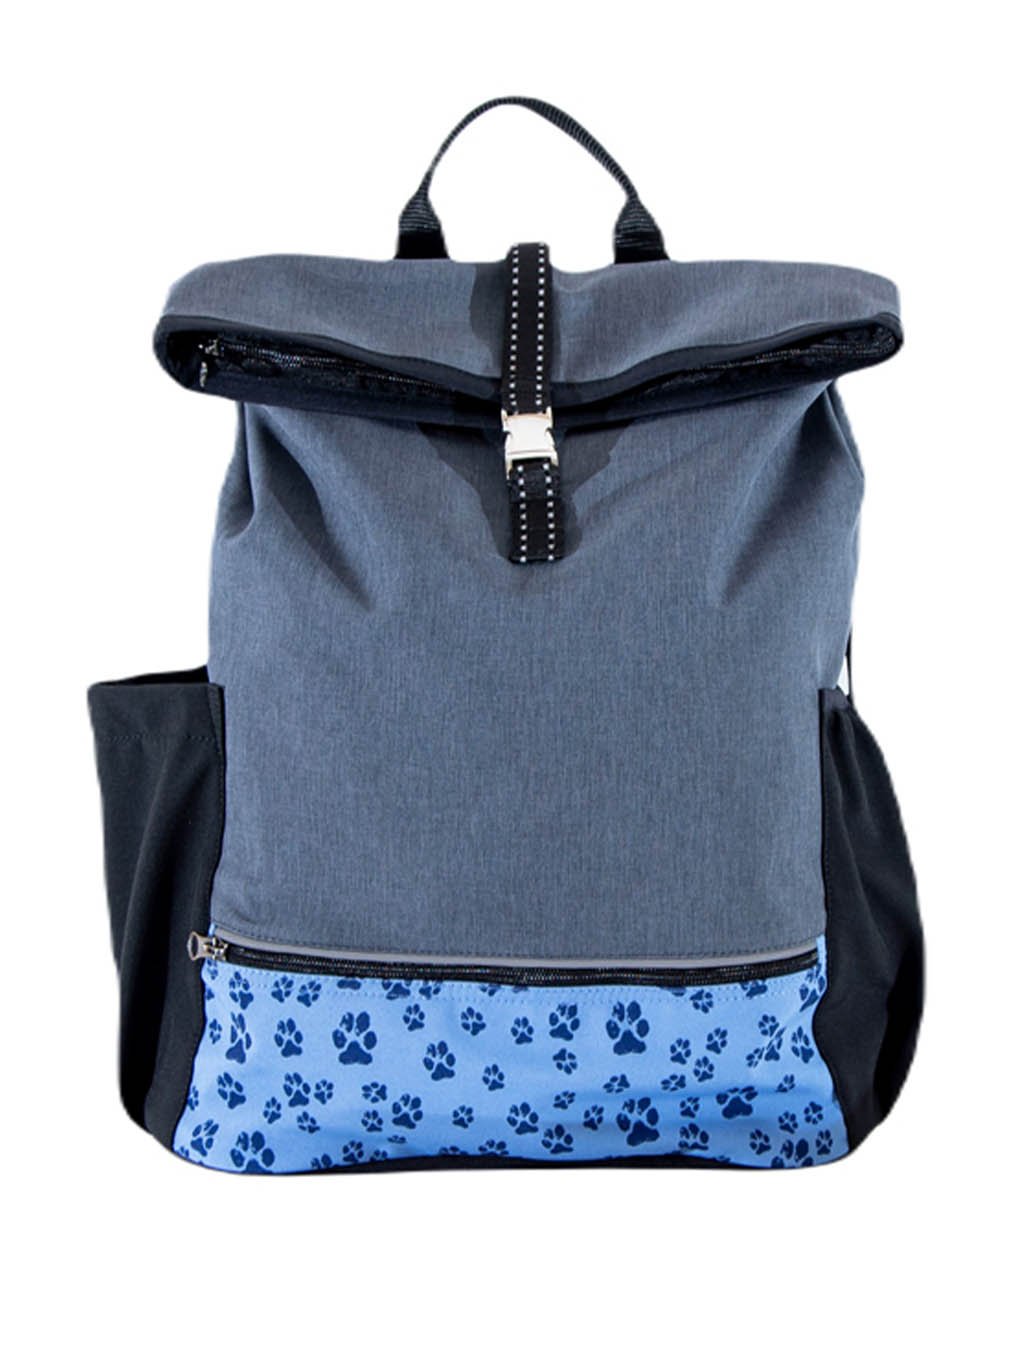 Training backpack PERIWINKLE with top zipper 4dox